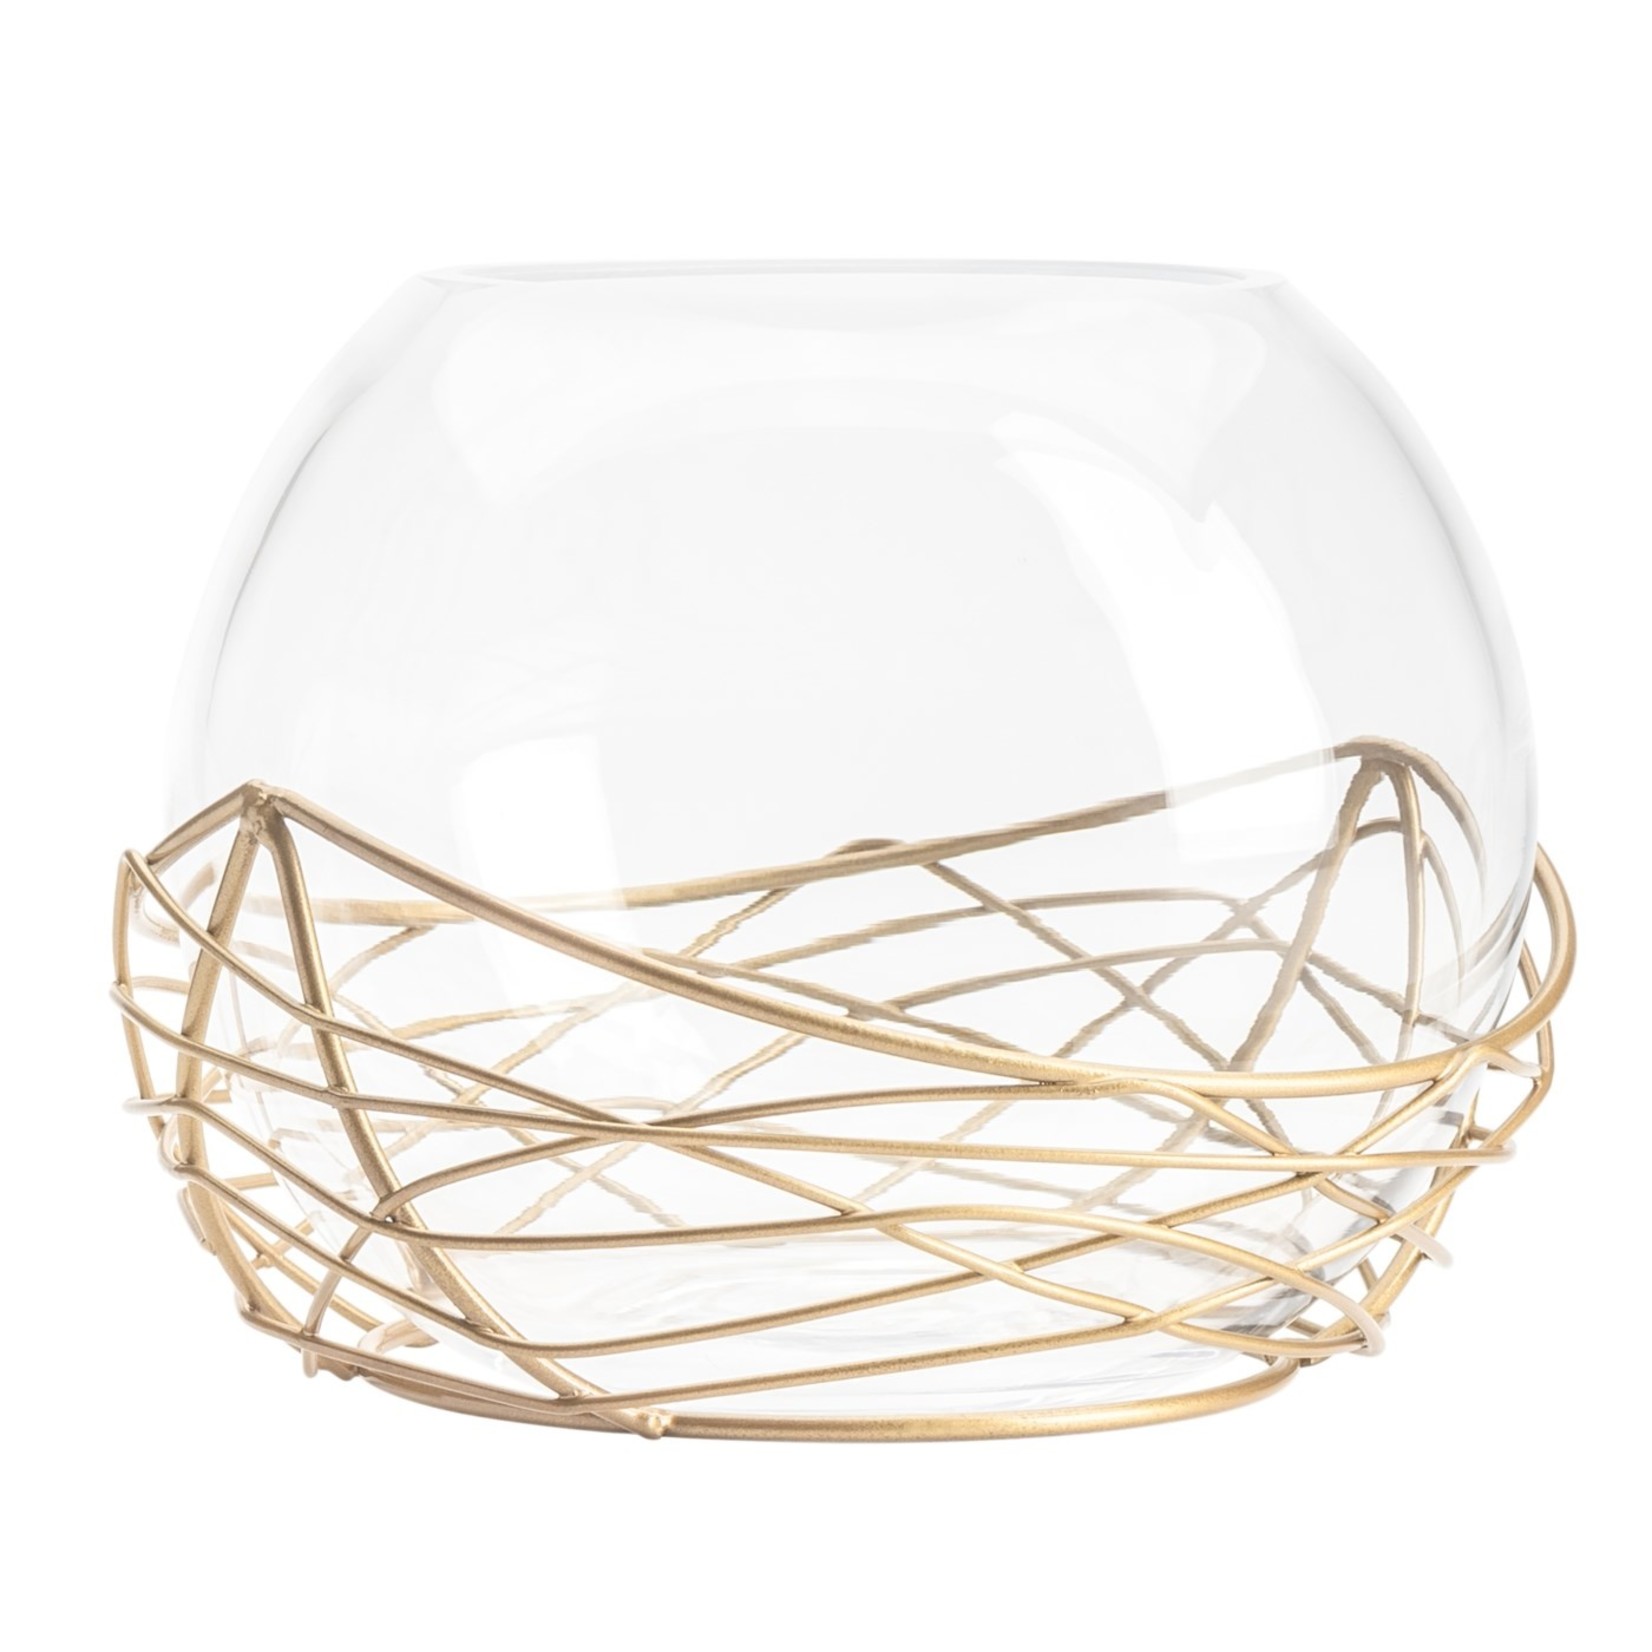 Torre & Tagus Wire Nest Glass Ball Vase - 7"